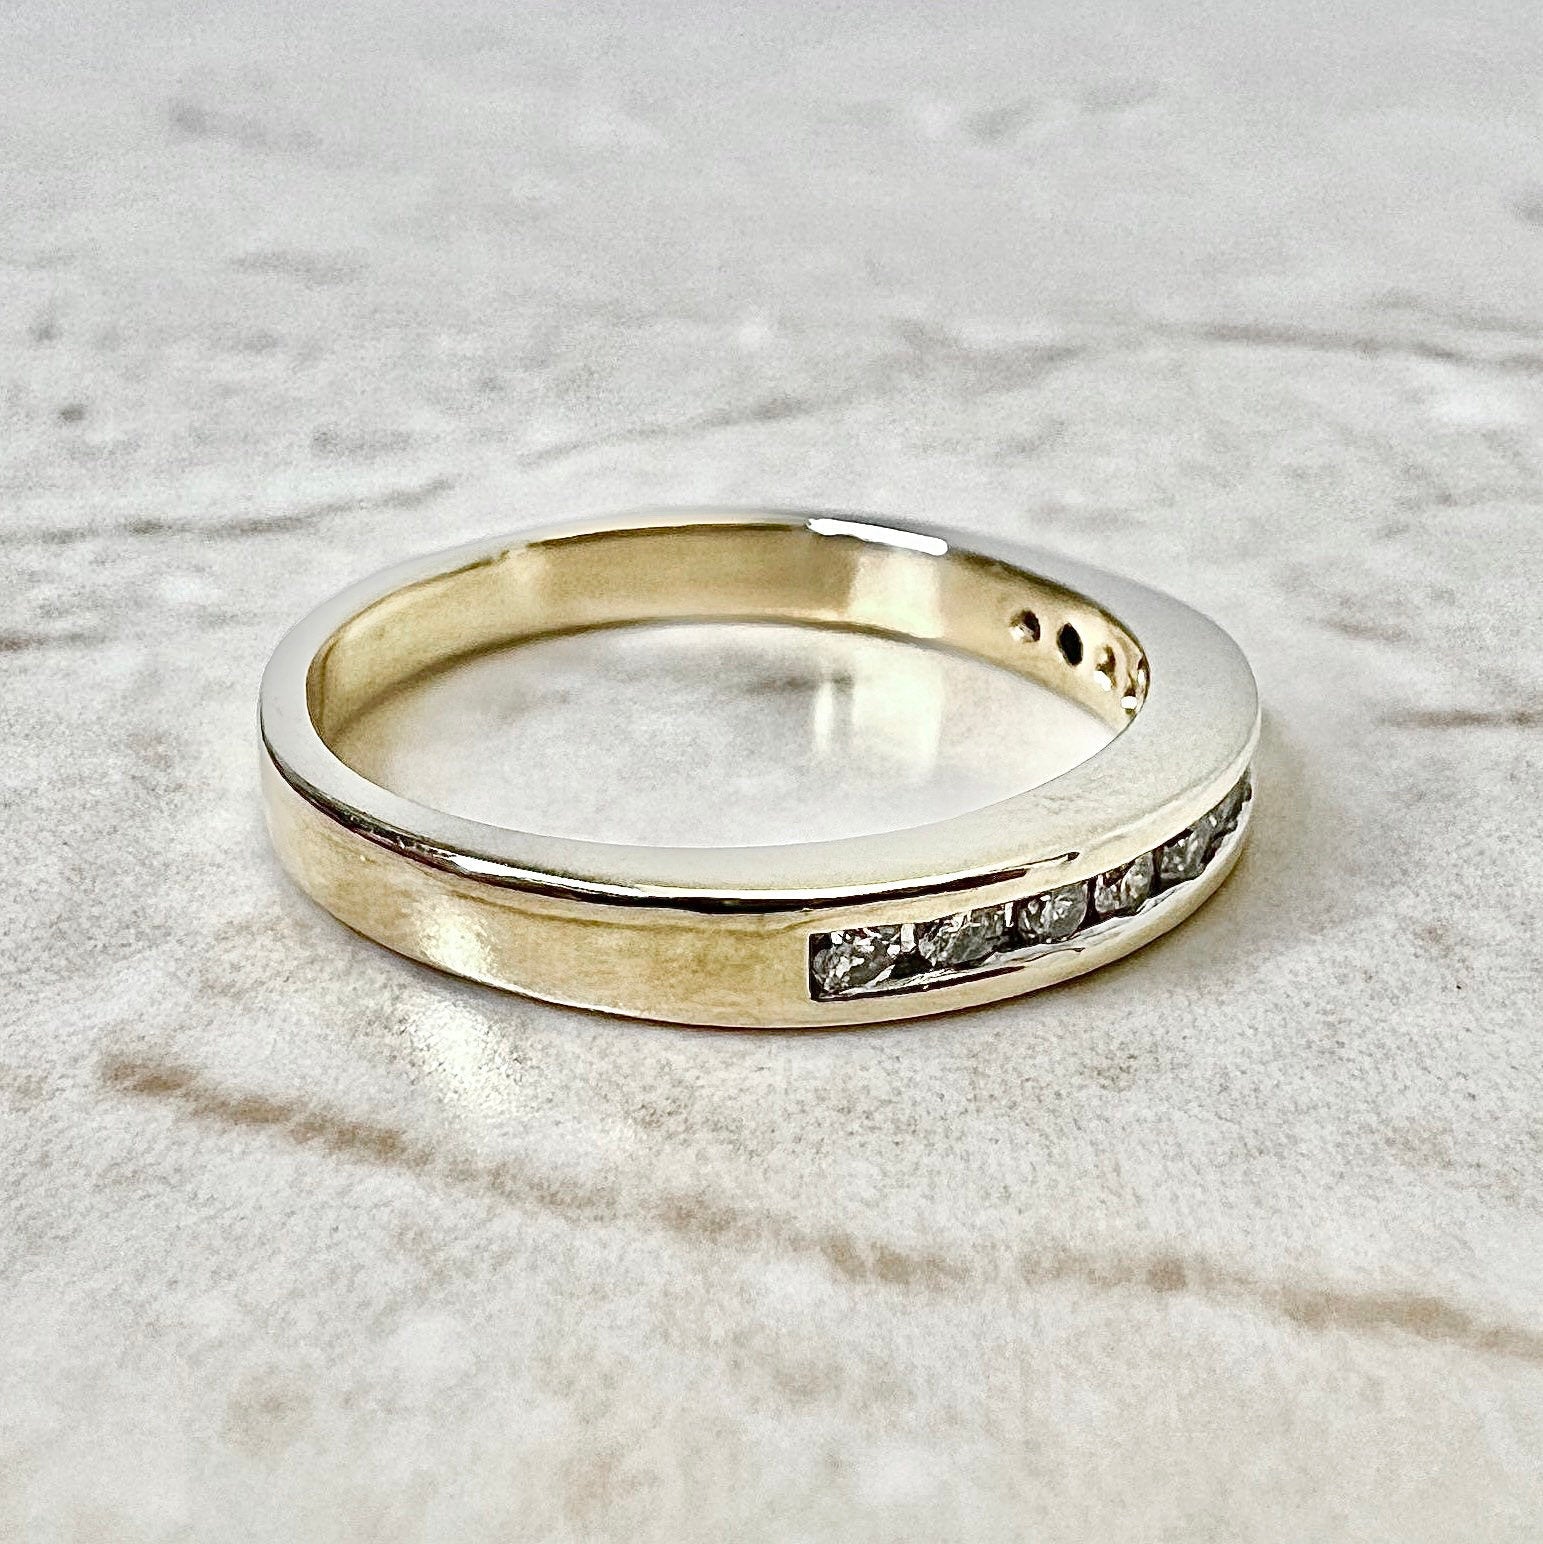 14K Half Eternity Diamond Band Ring 0.30 CTTW - Yellow Gold Eternity Ring - Anniversary Ring - Wedding Ring - Size 7.5 US - Holiday Gift